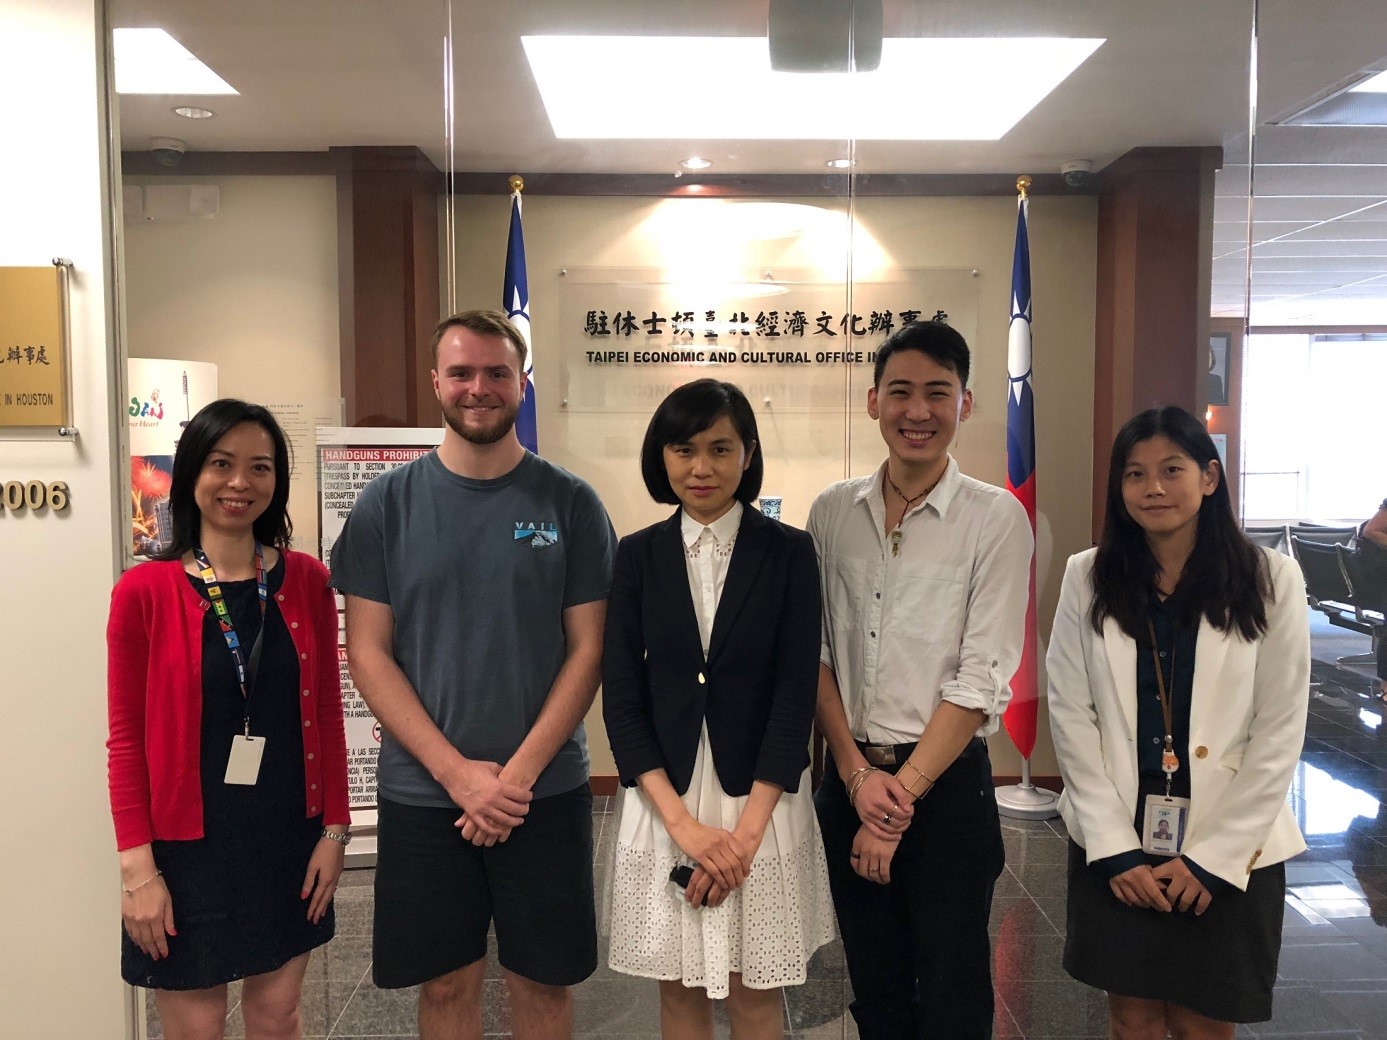 Scholarship recipients meet up before departing for Taiwan